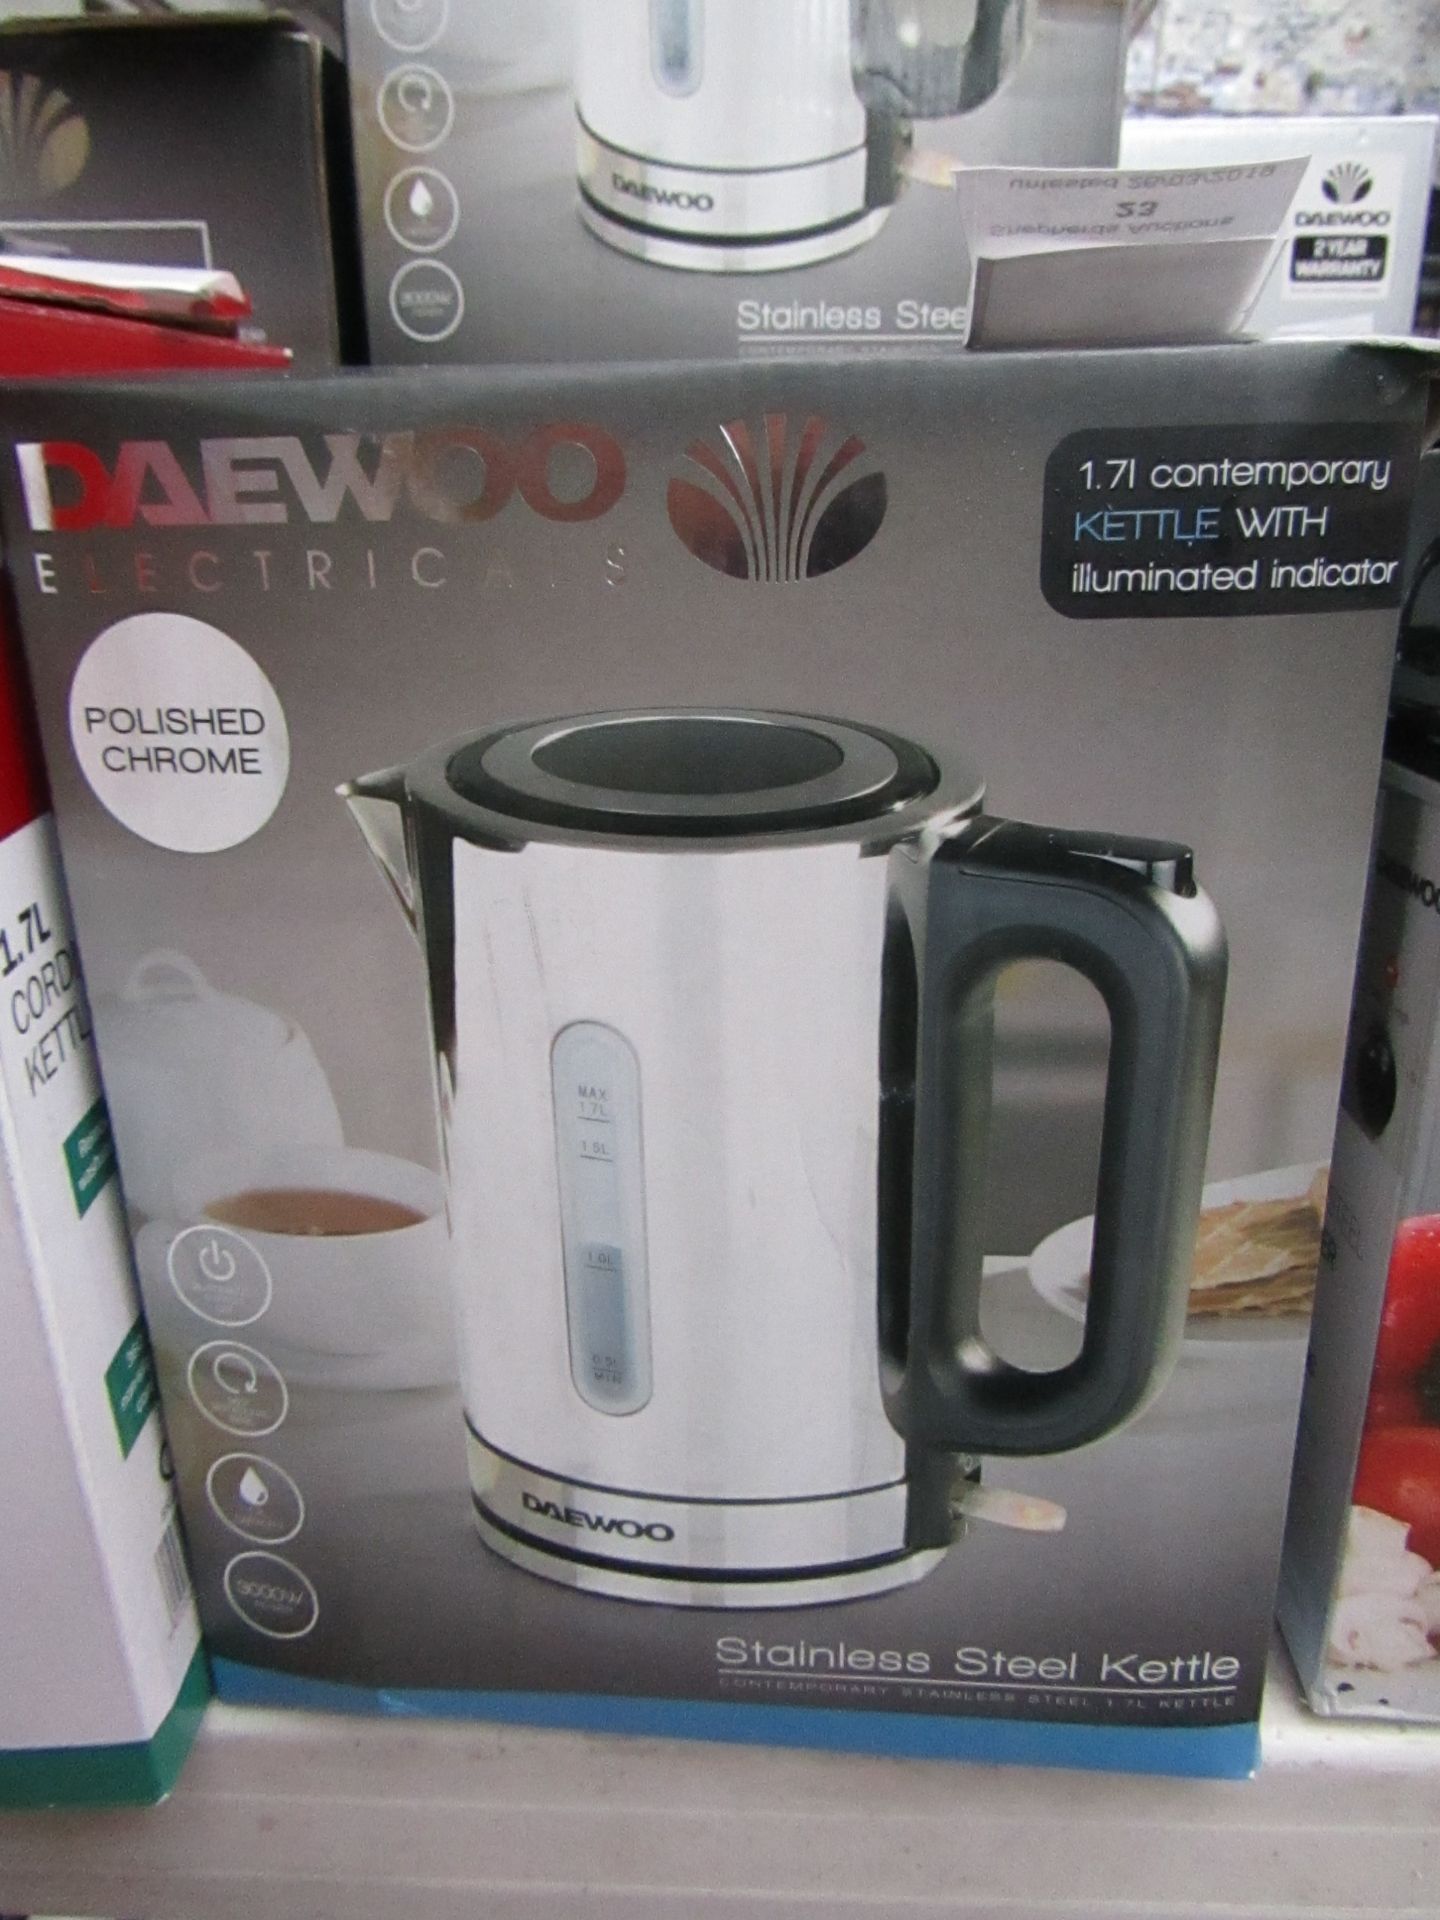 Daewoo stainless steel kettle Boxed and unchecked